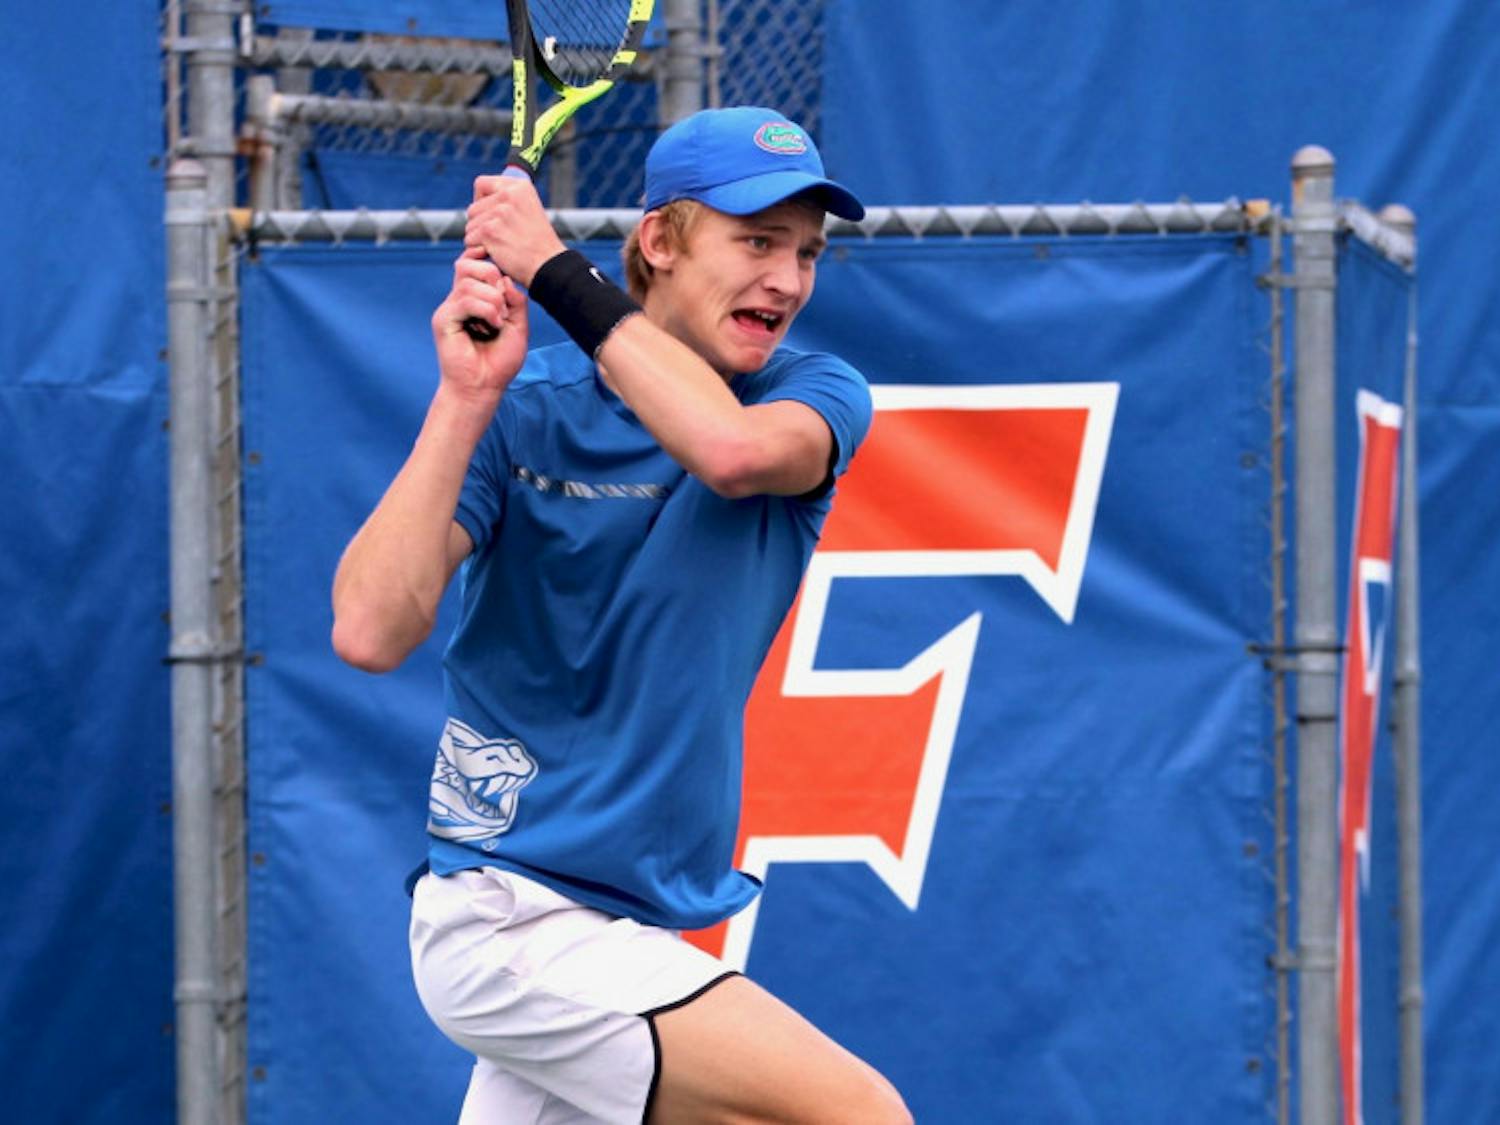 Johannes Ingildsen won the clinching singles match in a 4-3 win for Florida's men's tennis team over Notre Dame on Saturday.